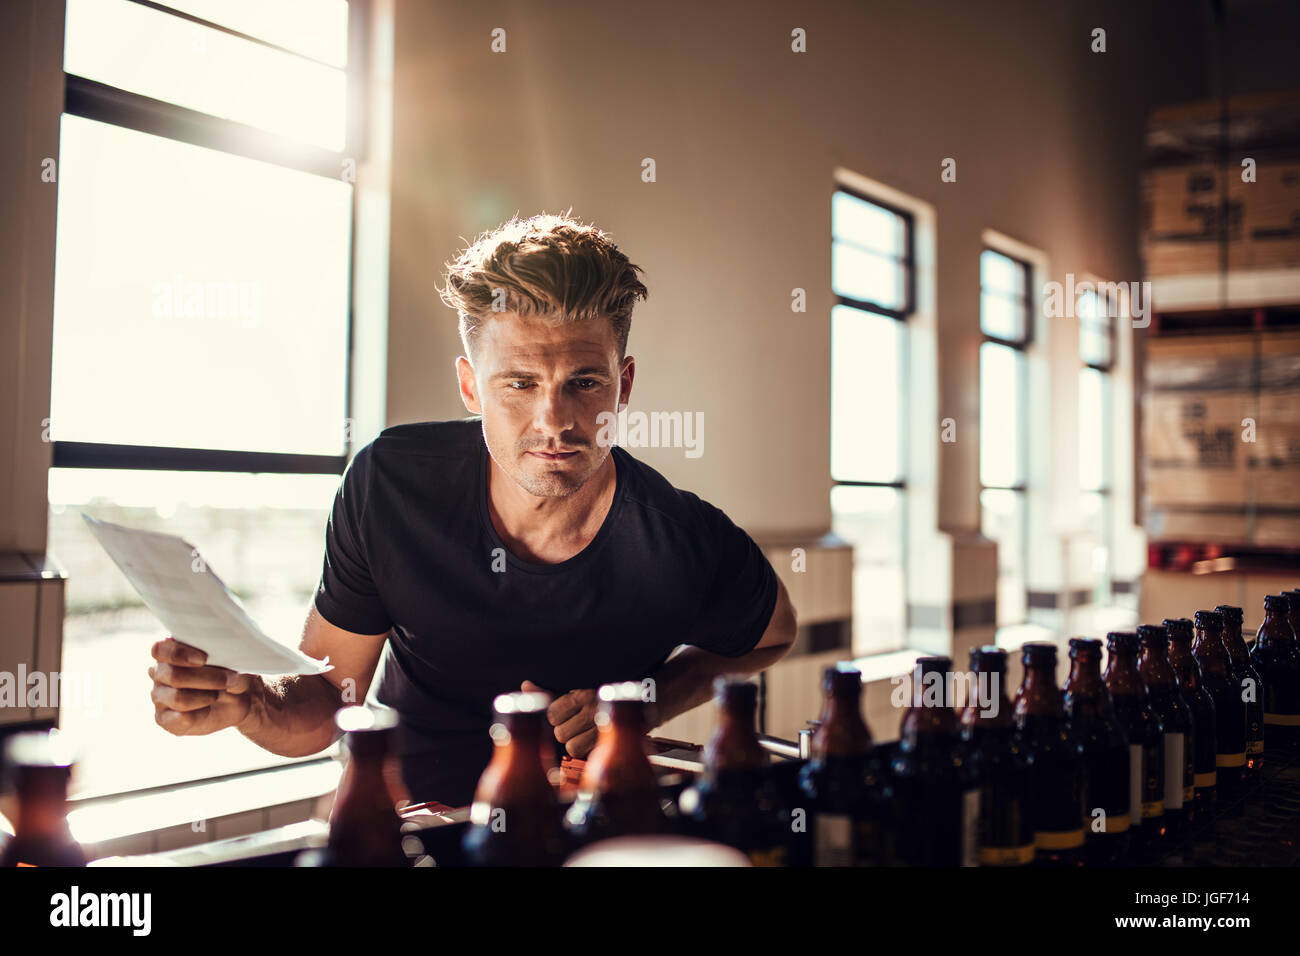 Brewery factory worker examining the quality of craft beer. Young man inspector working on alcohol manufacturing factory checking the beer bottles. Stock Photo